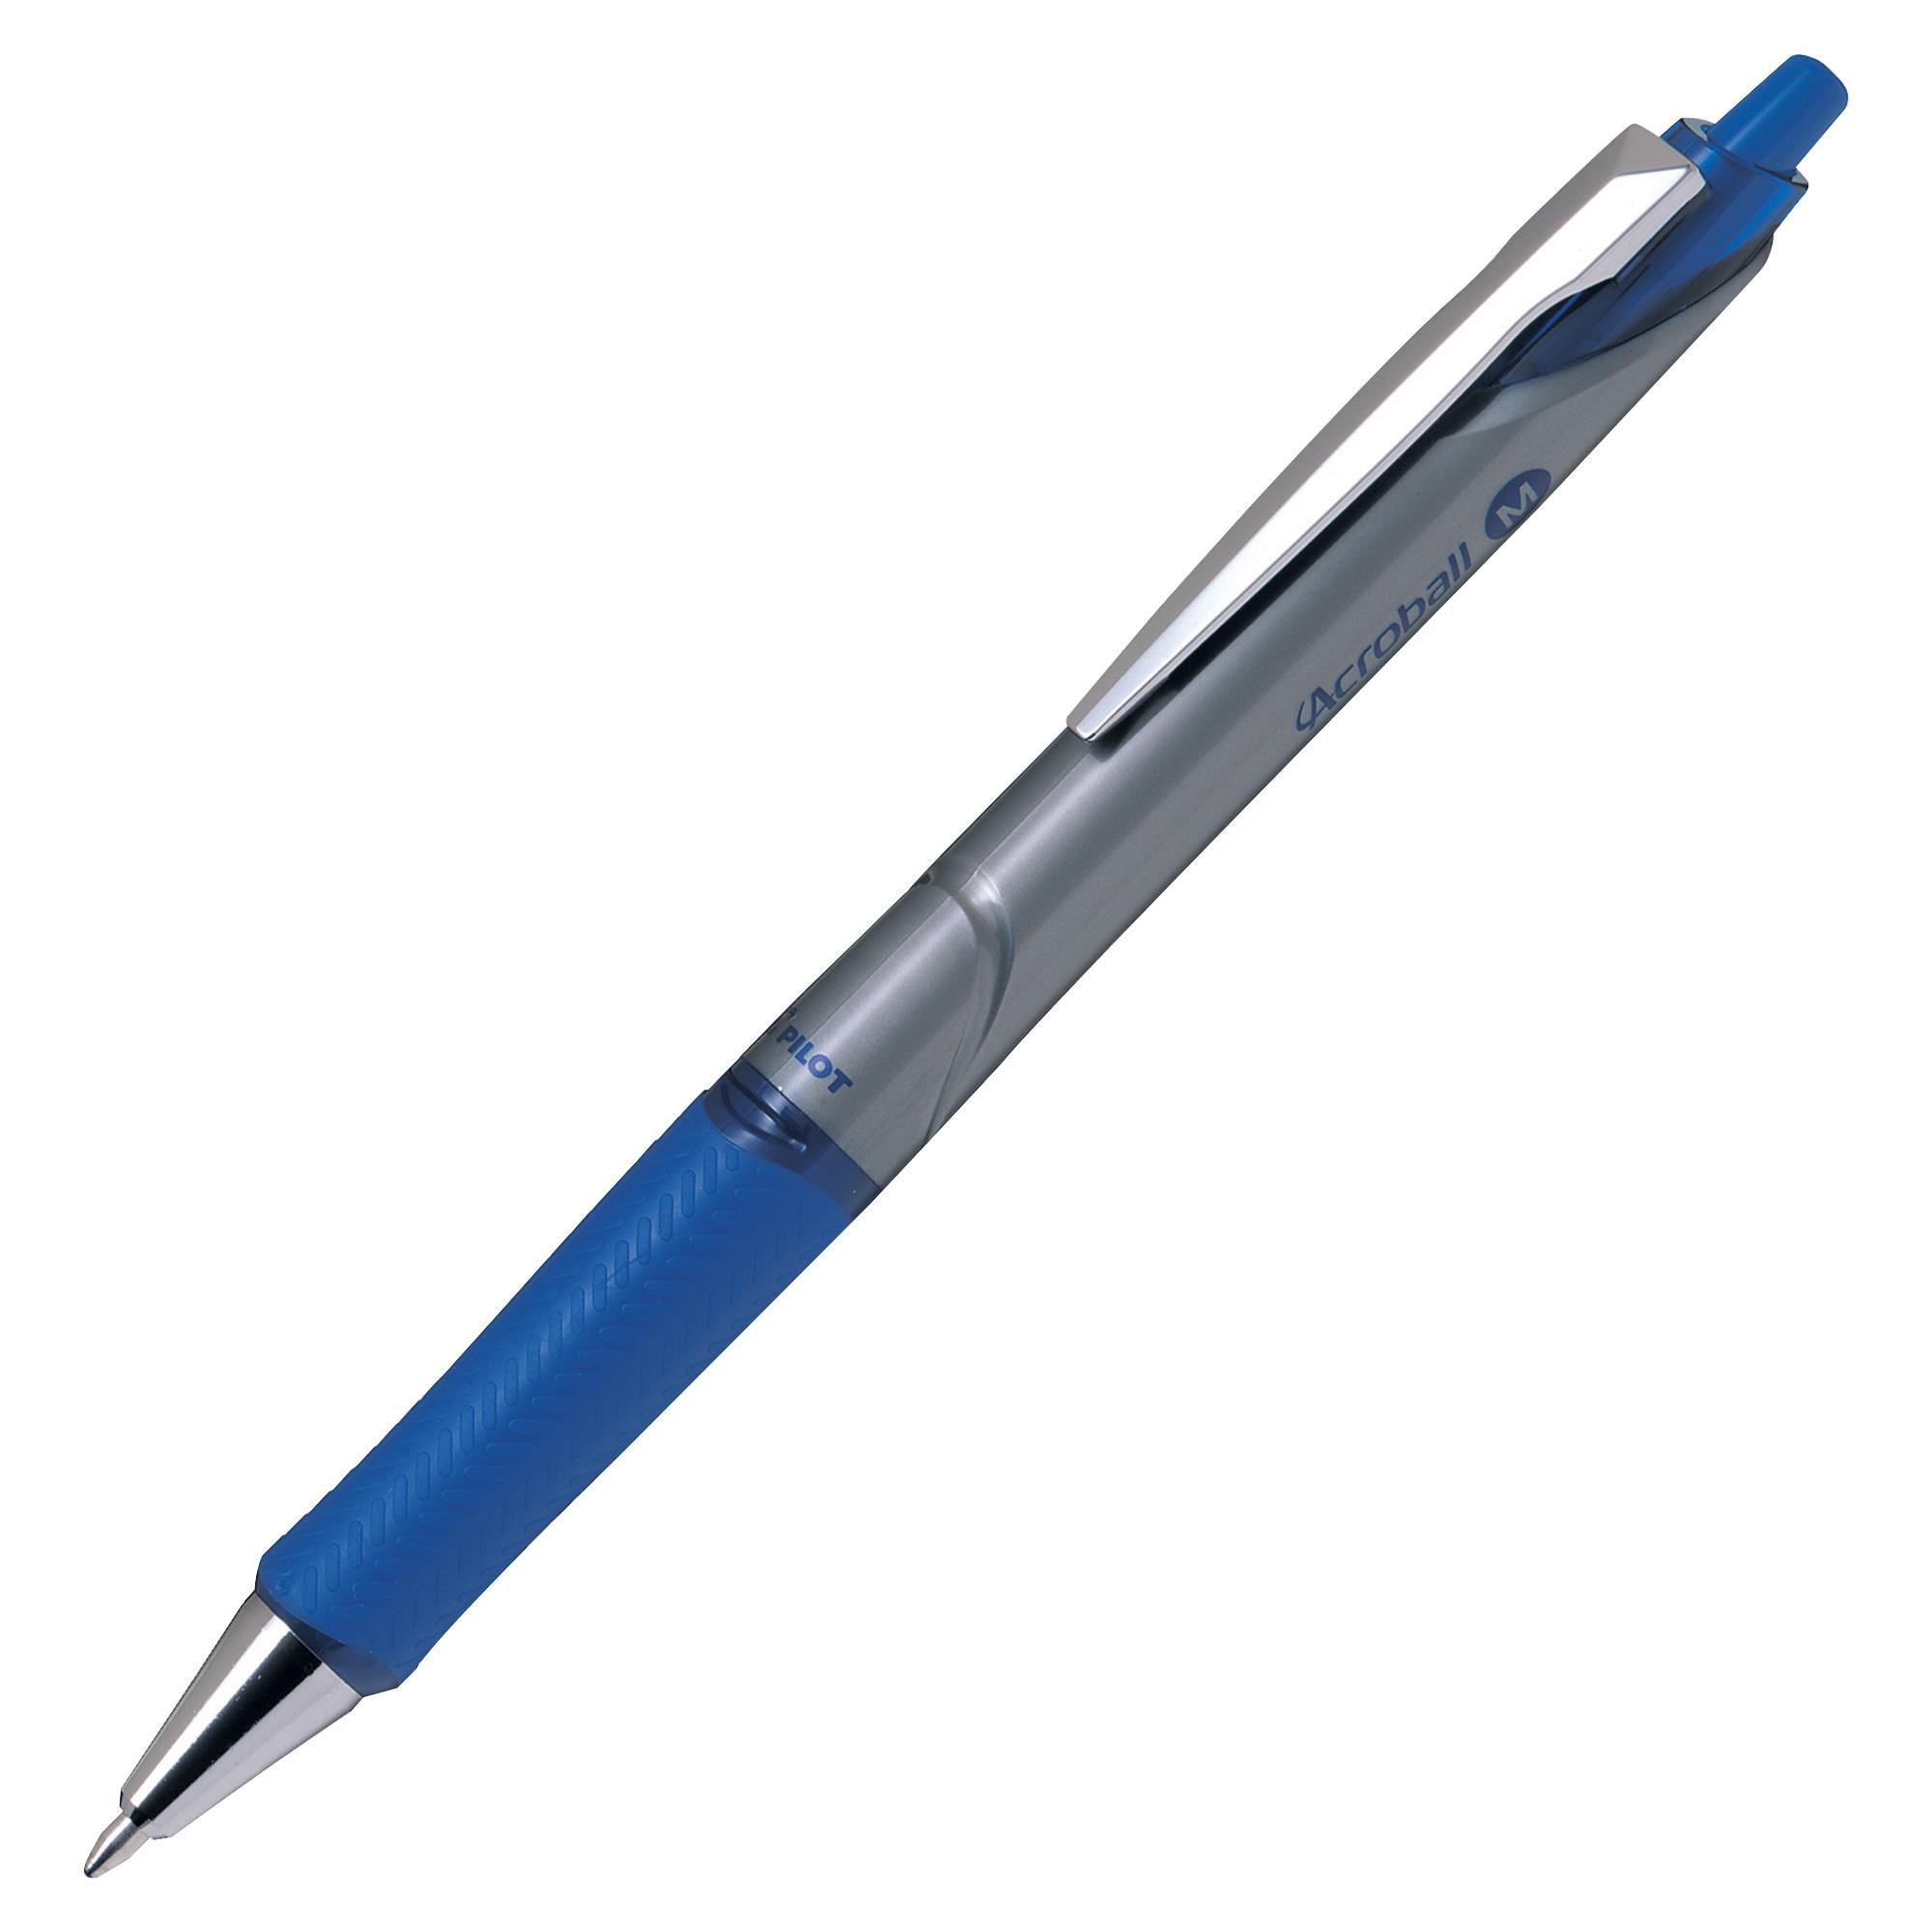 Acroball® Colors Advanced Ink Pen (1.0mm) - Acroball